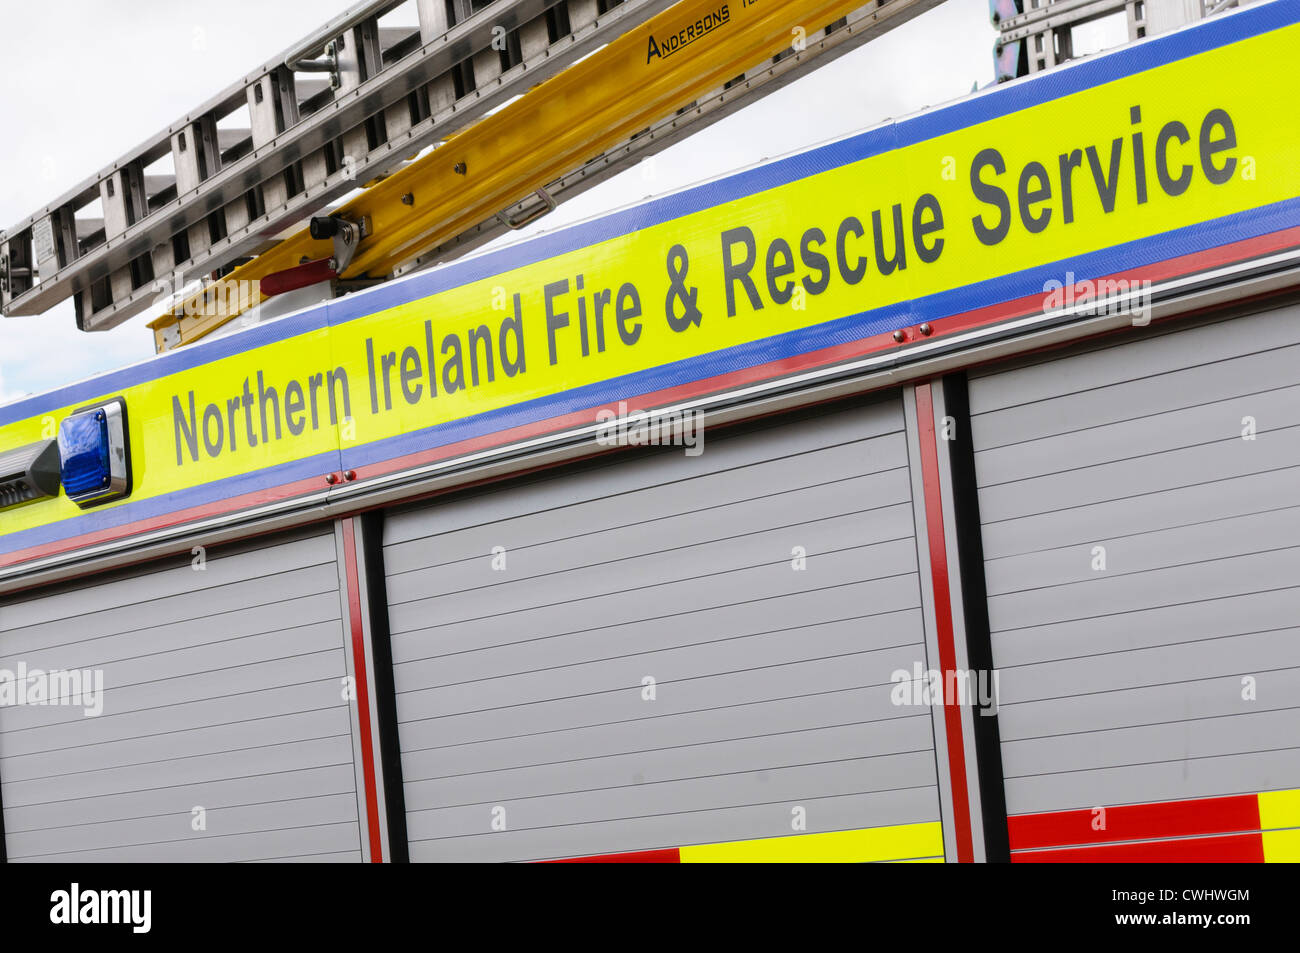 Northern Ireland Fire and Rescue Service fire engine Stock Photo